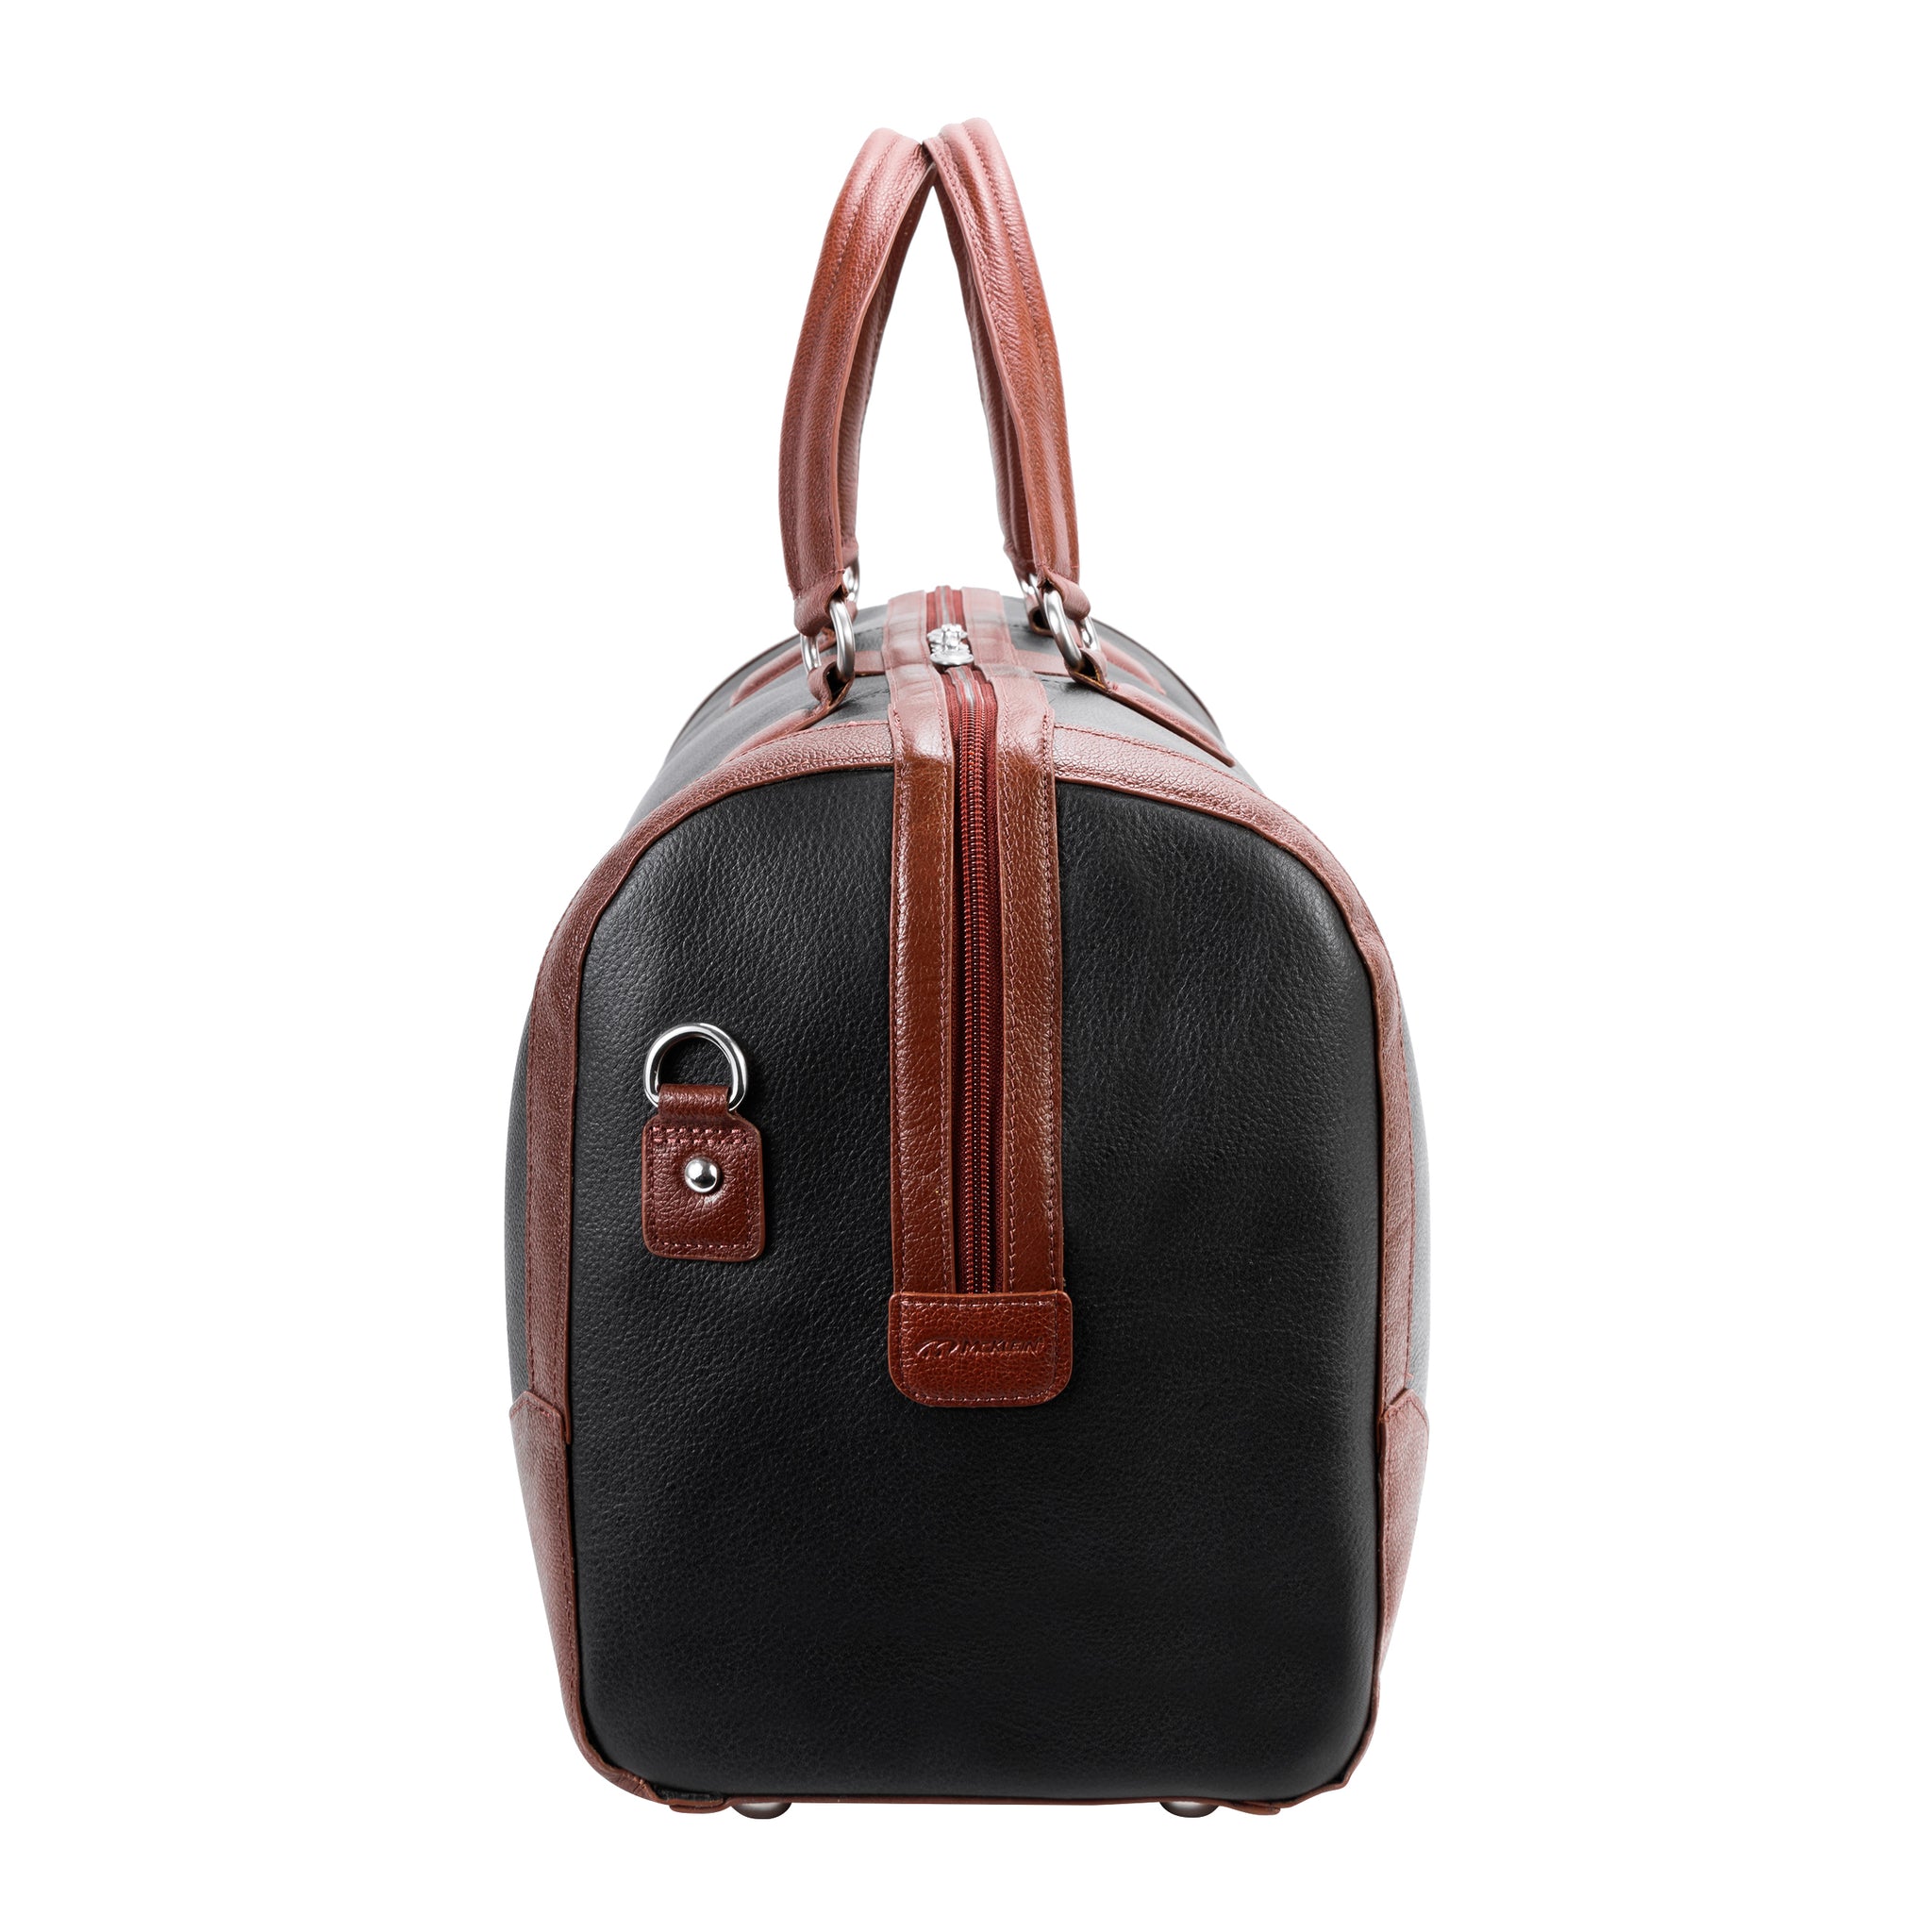 McKlein KINZIE 20" Leather, Two-Tone, Tablet Carry-All Duffel